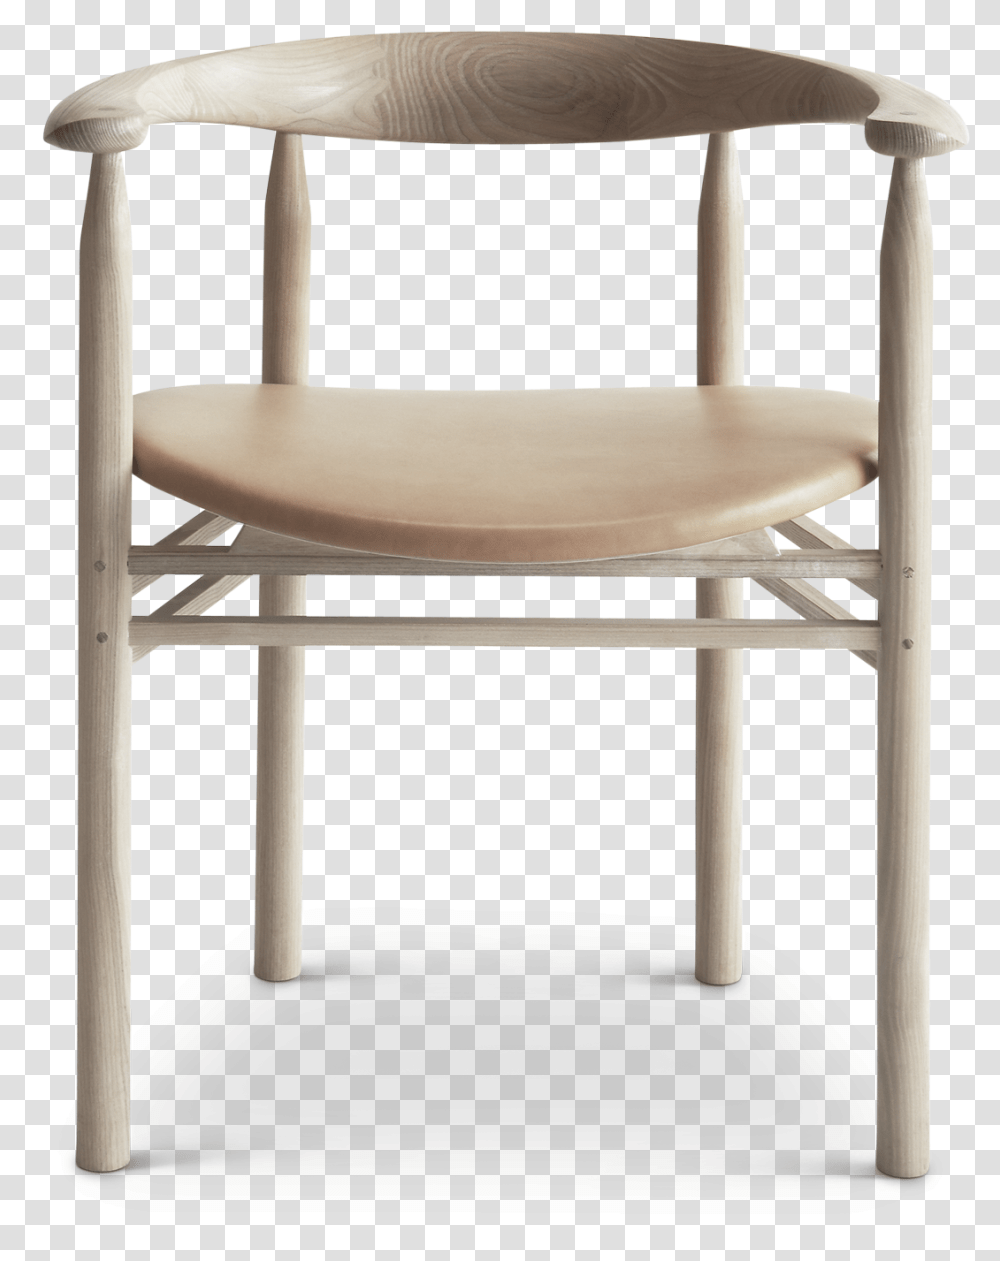 Linea Rmt6 Chair Jaula Vision L, Furniture, Tabletop, Wood, Plywood Transparent Png